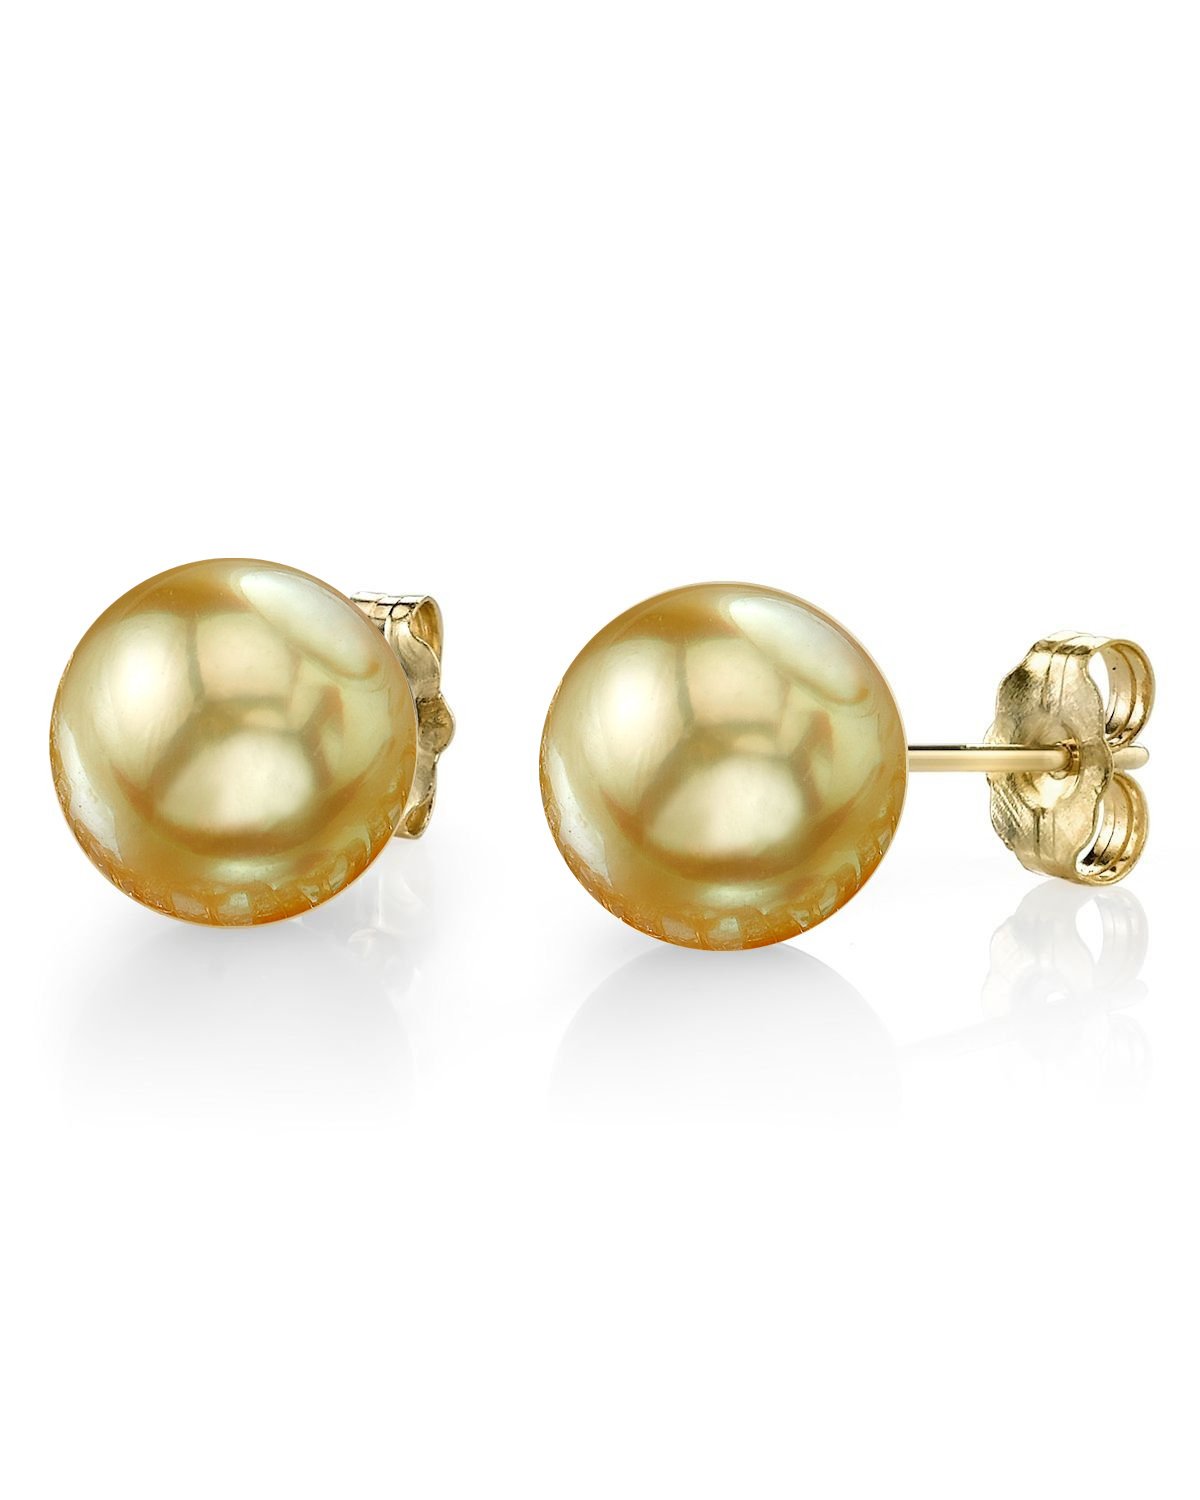 6mm Golden South Sea Round Pearl Stud Earrings